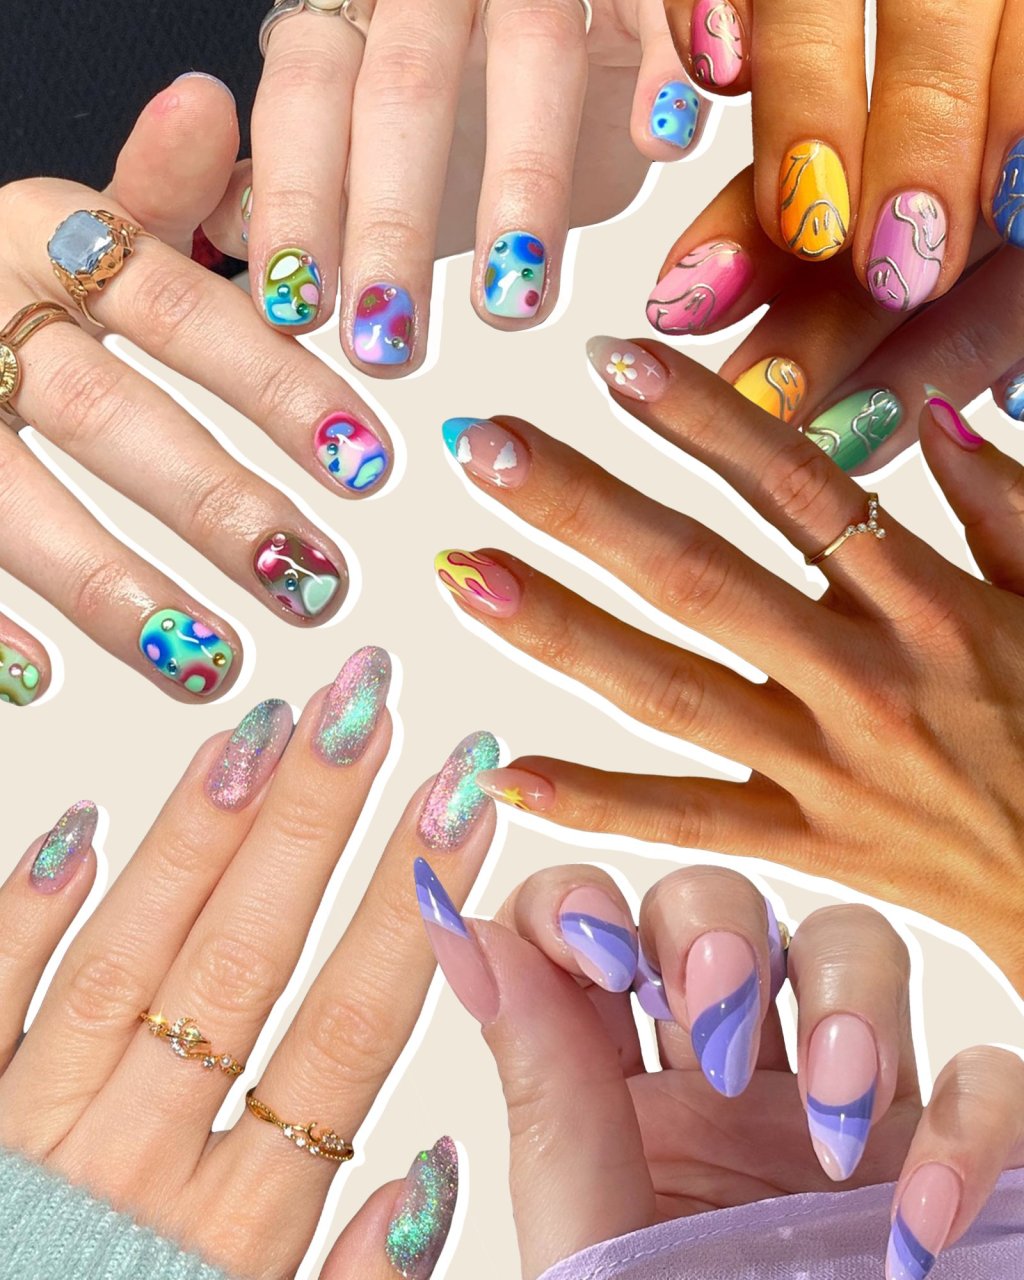 Music Festival Nails: Rock Your Look with Trendy Designs